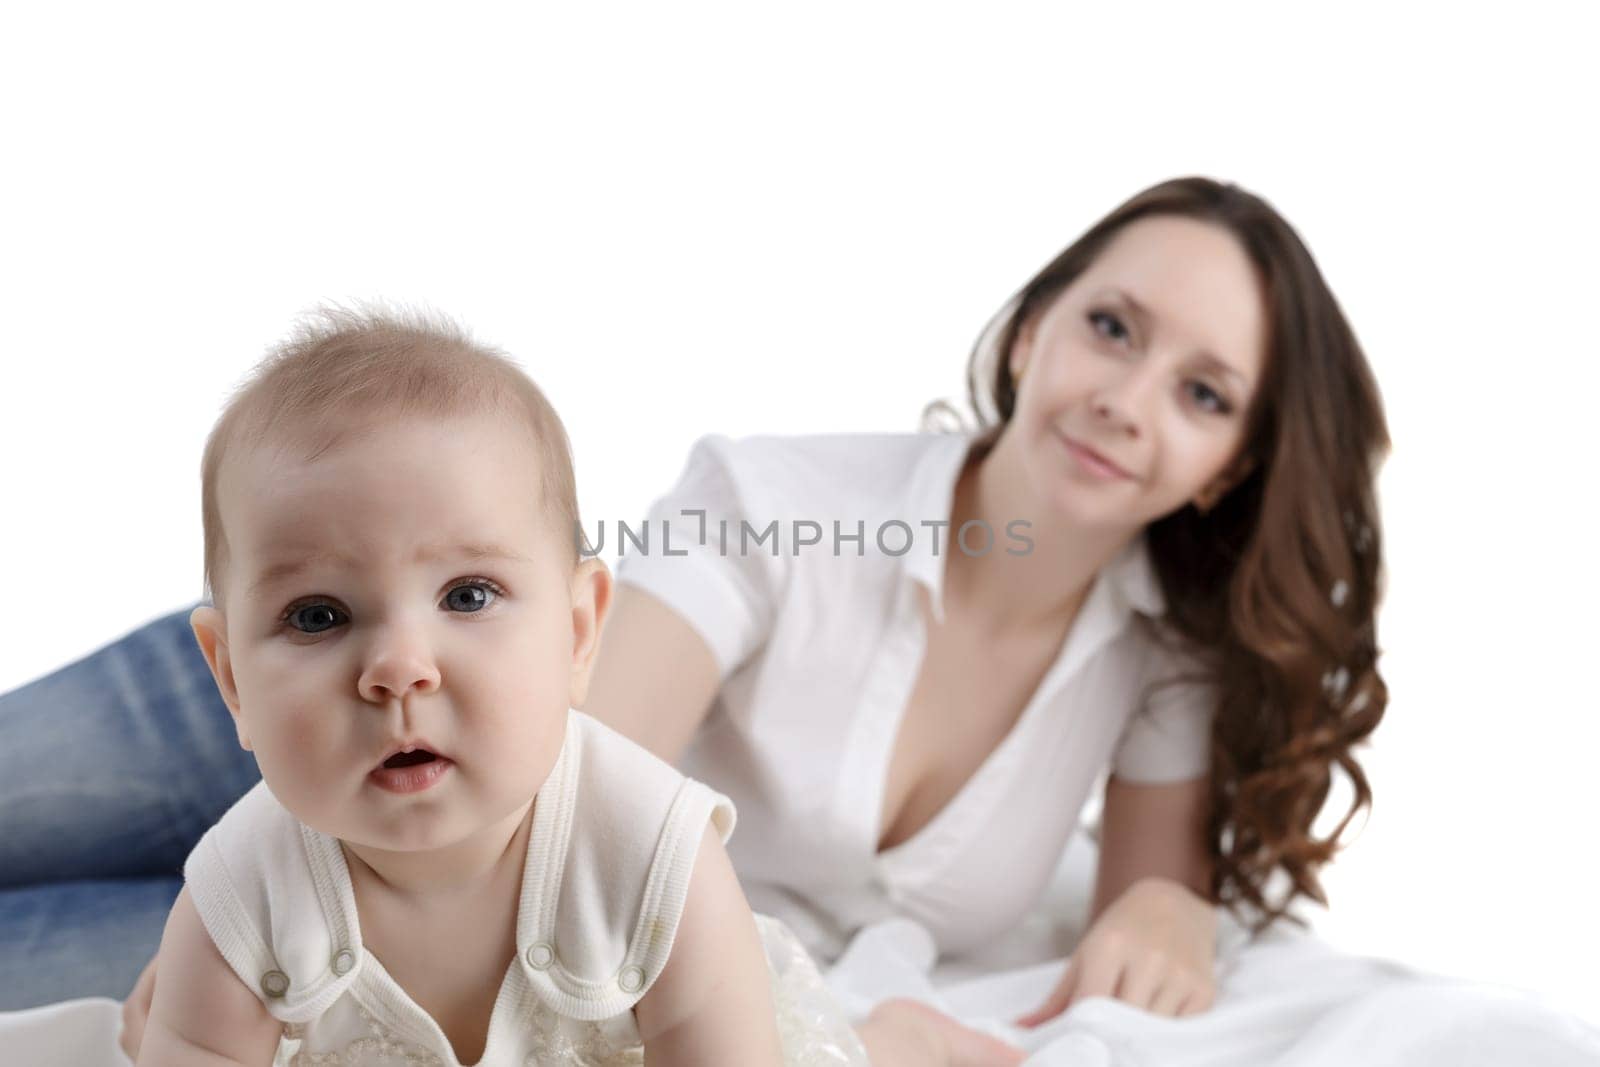 Adorable baby posing at camera and her mom on background